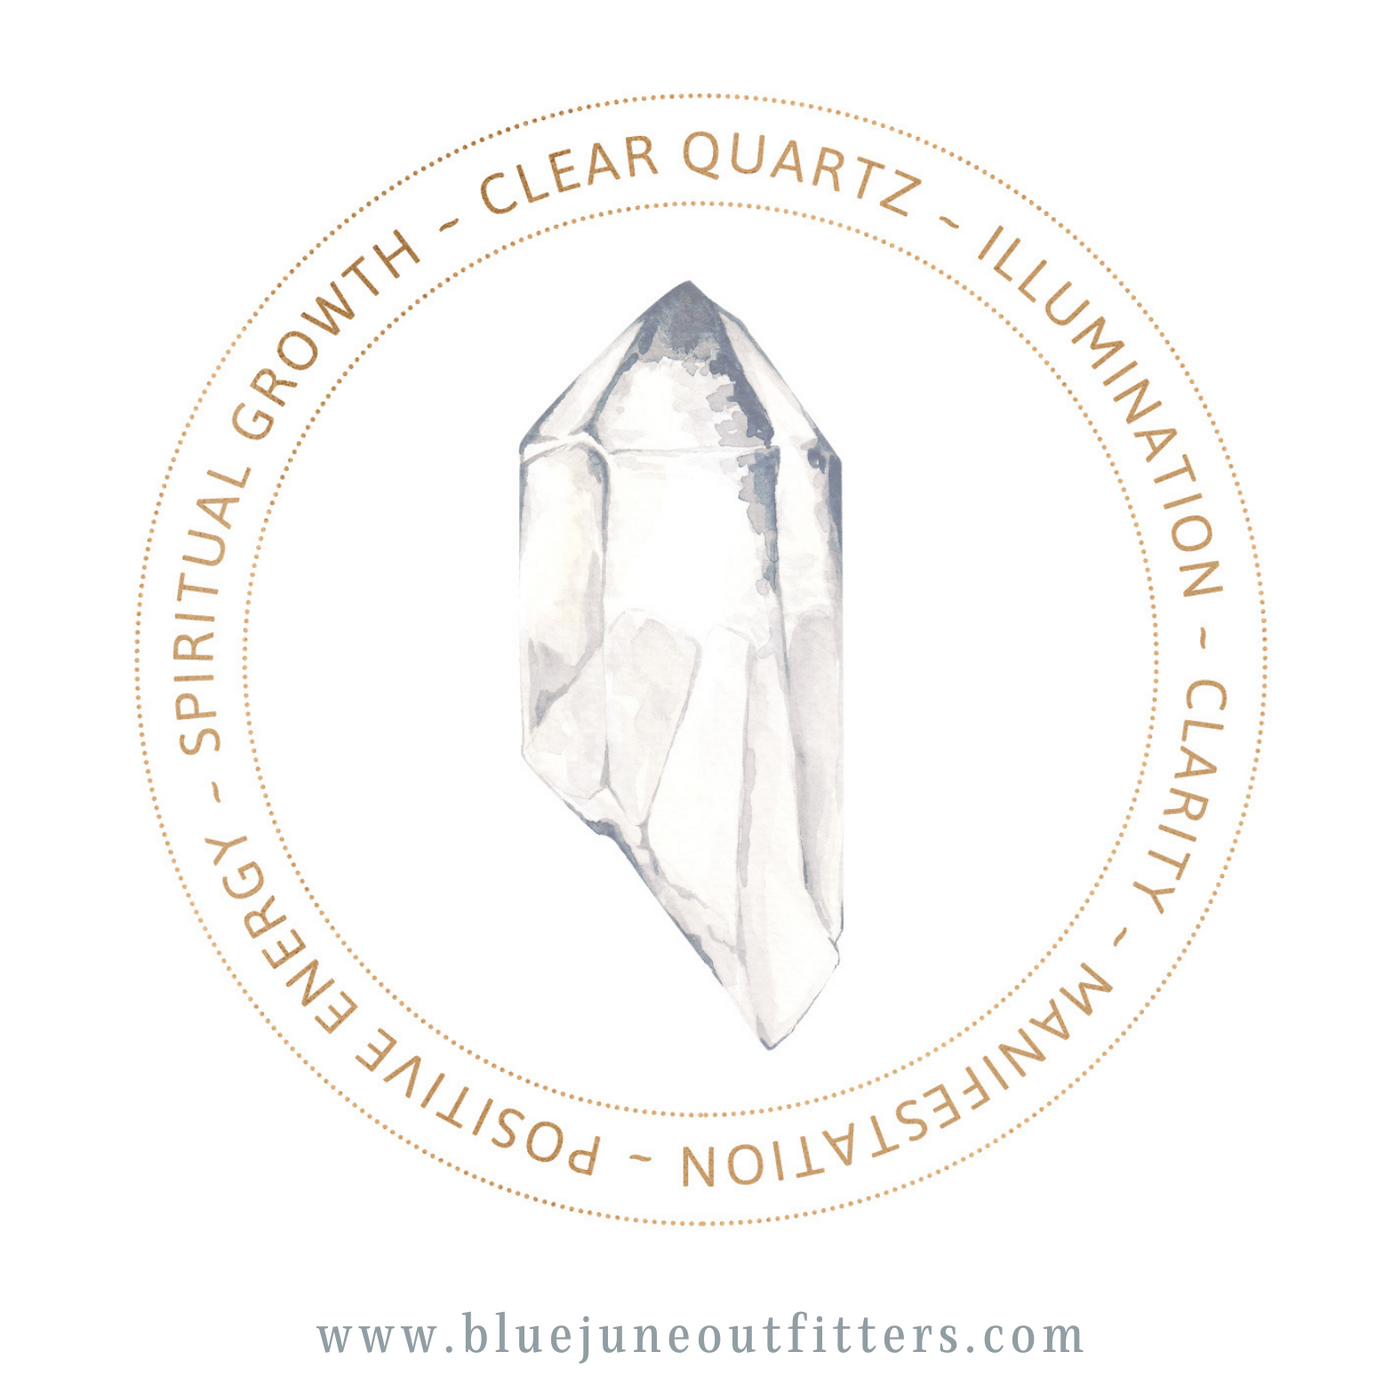 Watercolor painting of a clear quartz crystal. In text around the crystal, it outlines the metaphysical properties of the crystal - illumination, clarity, manifestation, positive energy and spiritual growth. 